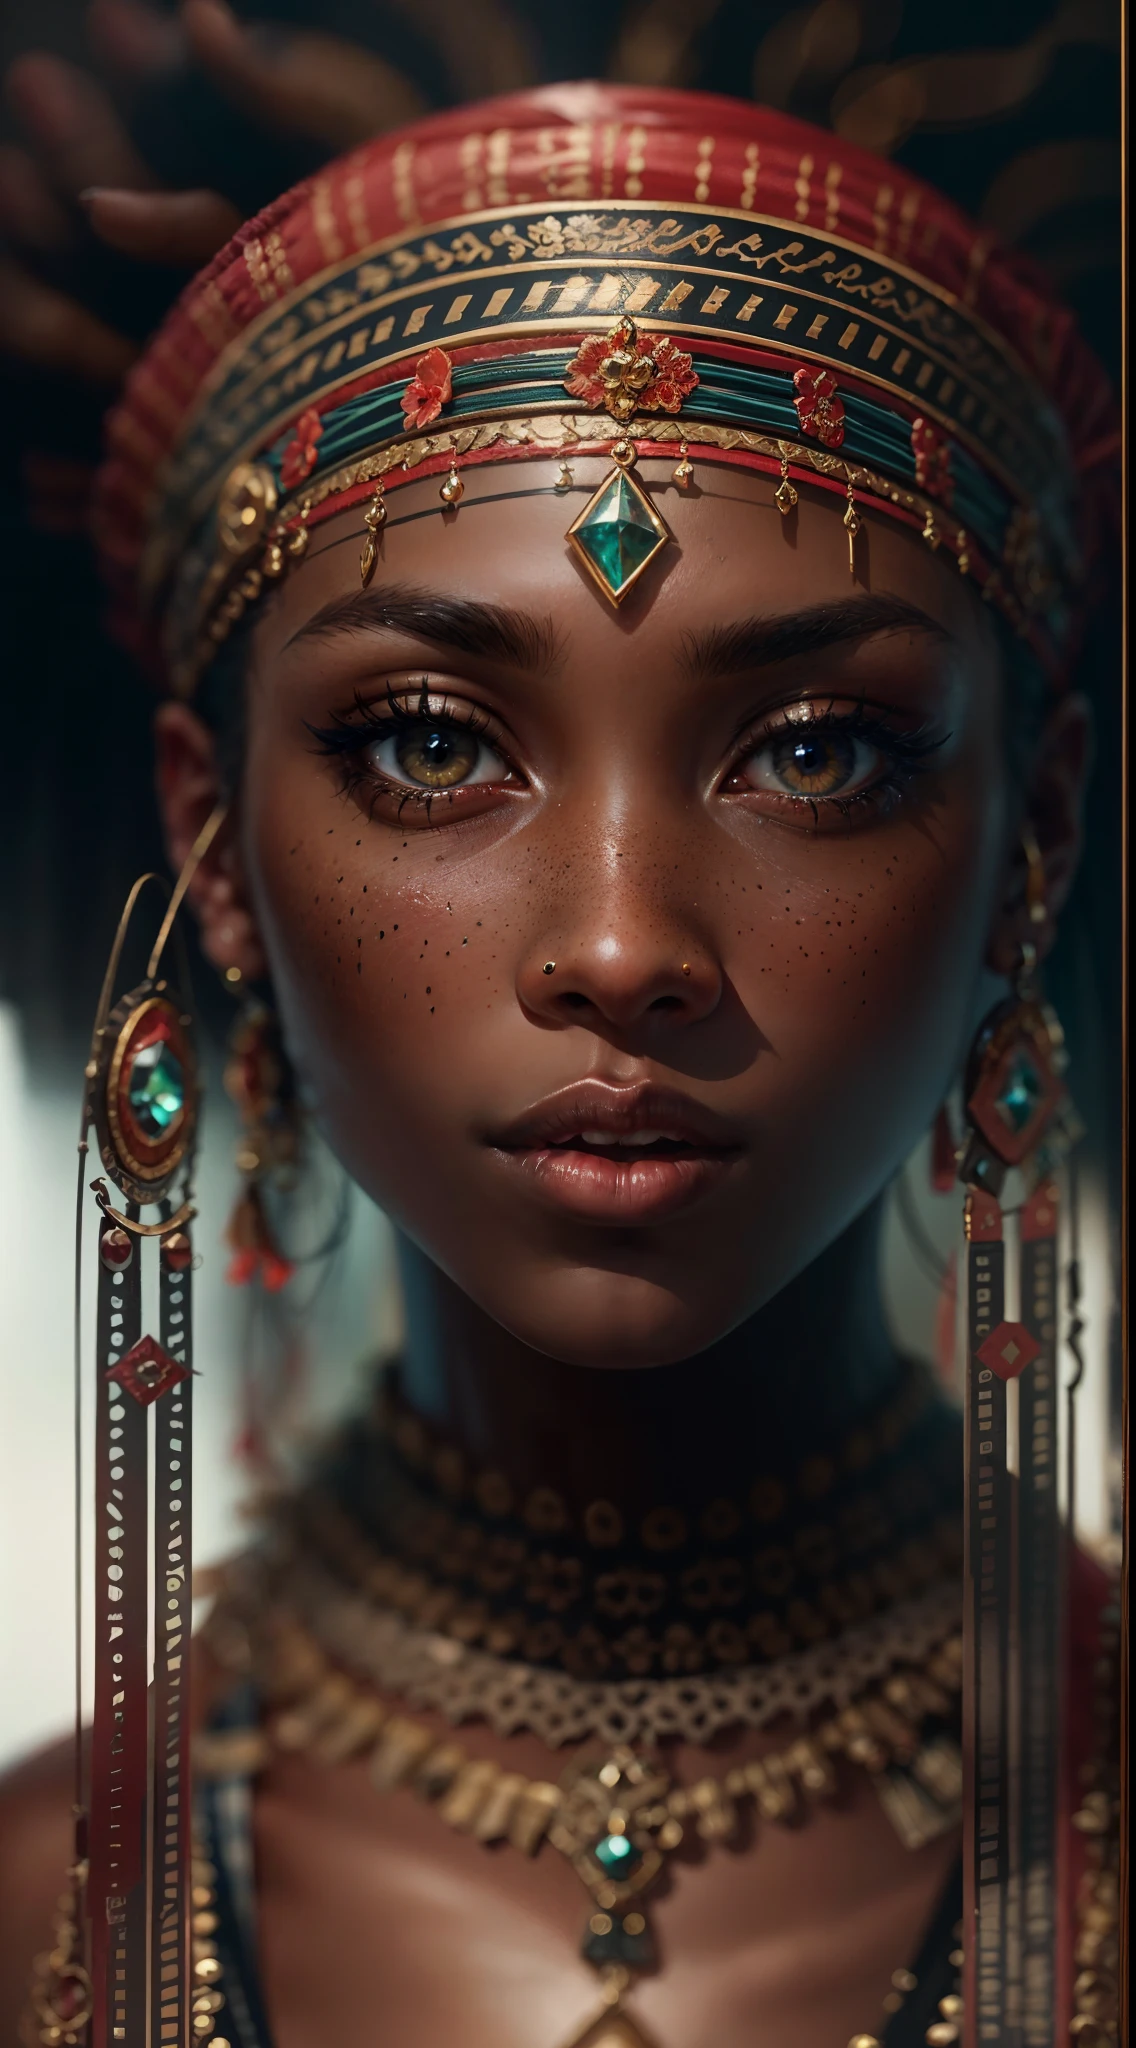 An exquisite portrait of a Black African men with deep ebony skin, the photograph captured in stunning 8k resolution and raw format to preserve the highest quality of details. The woman's beauty is undeniable, her face commanding the frame in a close-up shot that reveals the intricate details of her eyes. She wears a dress that complements her radiant skin, and her eyes are portrayed with meticulous attention to detail, showcasing the captivating depth within. The photograph is taken with a lens that emphasizes the defiance in her gaze, and the backdrop is a dark studio setting that enhances the muted colors of the scene. The lighting and shadows are expertly crafted to bring out the richness of her skin tone and the subtle nuances of her features. Her ginger hair, with its distinct hue, adds a touch of warmth and contrast against her ebony skin. The interior setting adds a sense of intimacy, while the freckles on her skin tell their own story. The overall composition captures her essence with authenticity and grace, creating a portrait that is a celebration of her heritage and beauty. Photography by defiance512, utilizing the best techniques for shadow and lighting, to create a mesmerizing portrayal that transcends the visual.